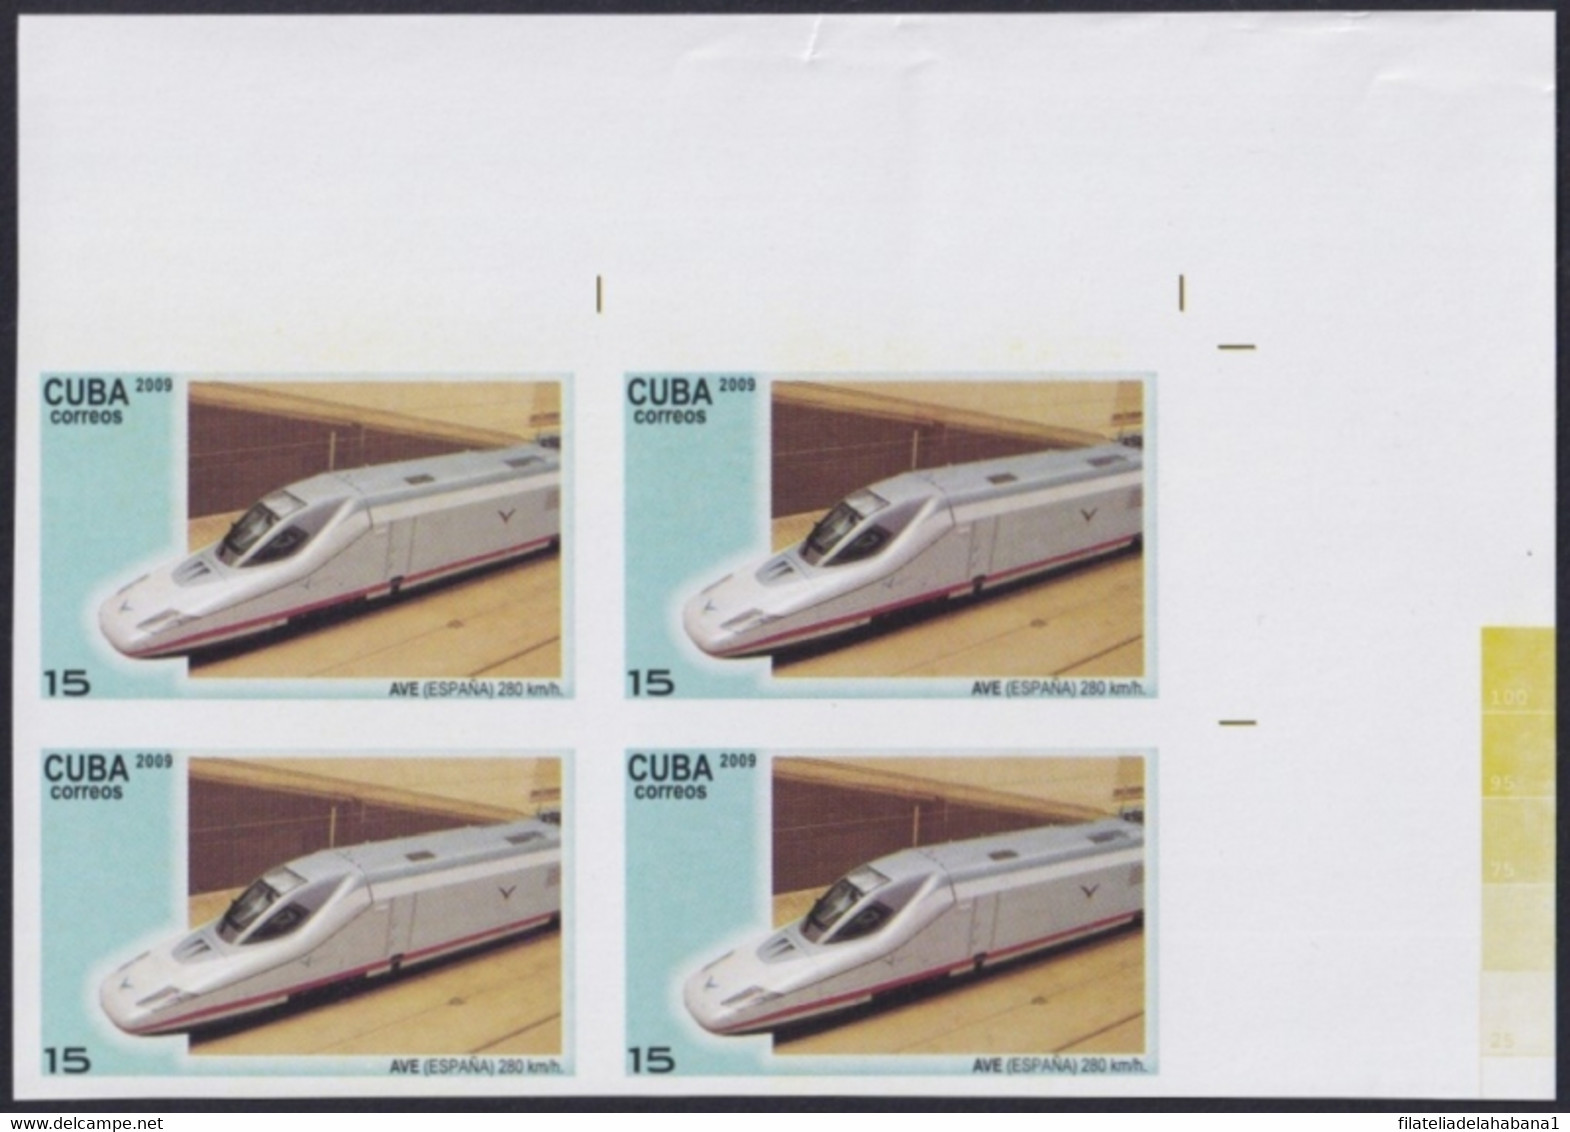 2009.444 CUBA 2009 75c MNH IMPERFORATED PROOF FAST RAILROAD AVE SPAIN ESPAÑA. - Imperforates, Proofs & Errors